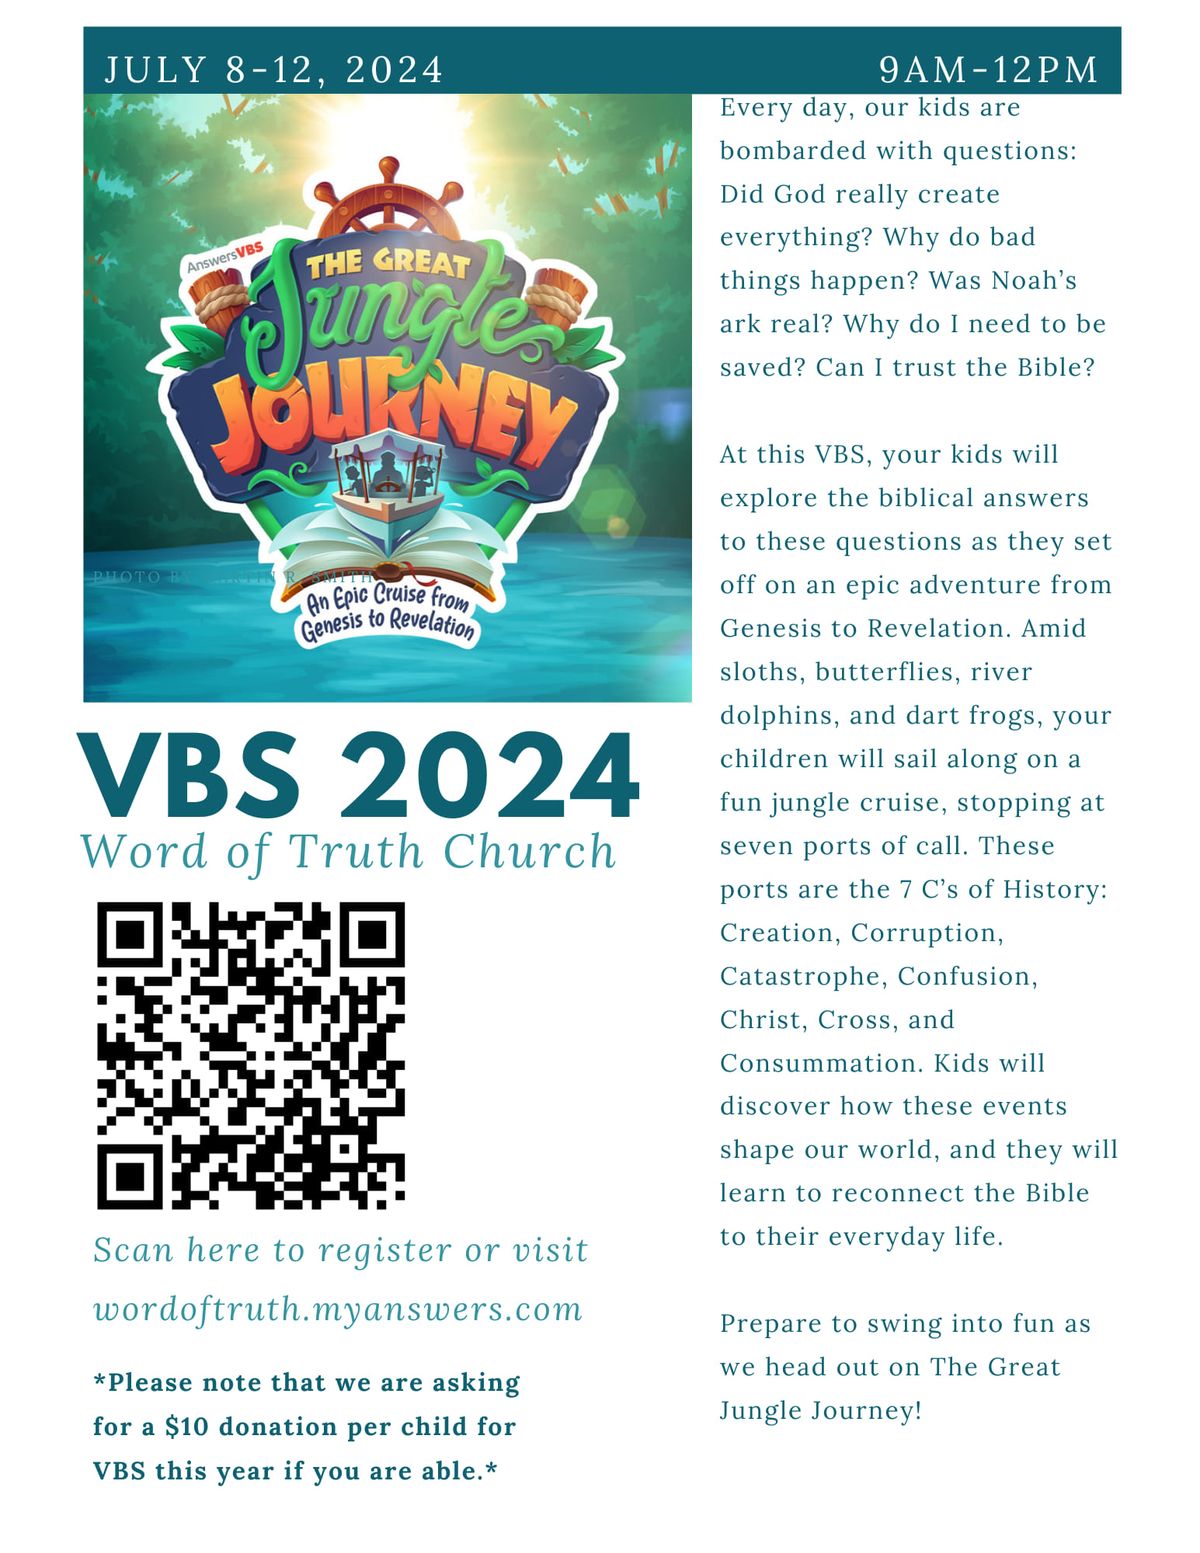 VBS and Christian Apologetics\/Worldview Class